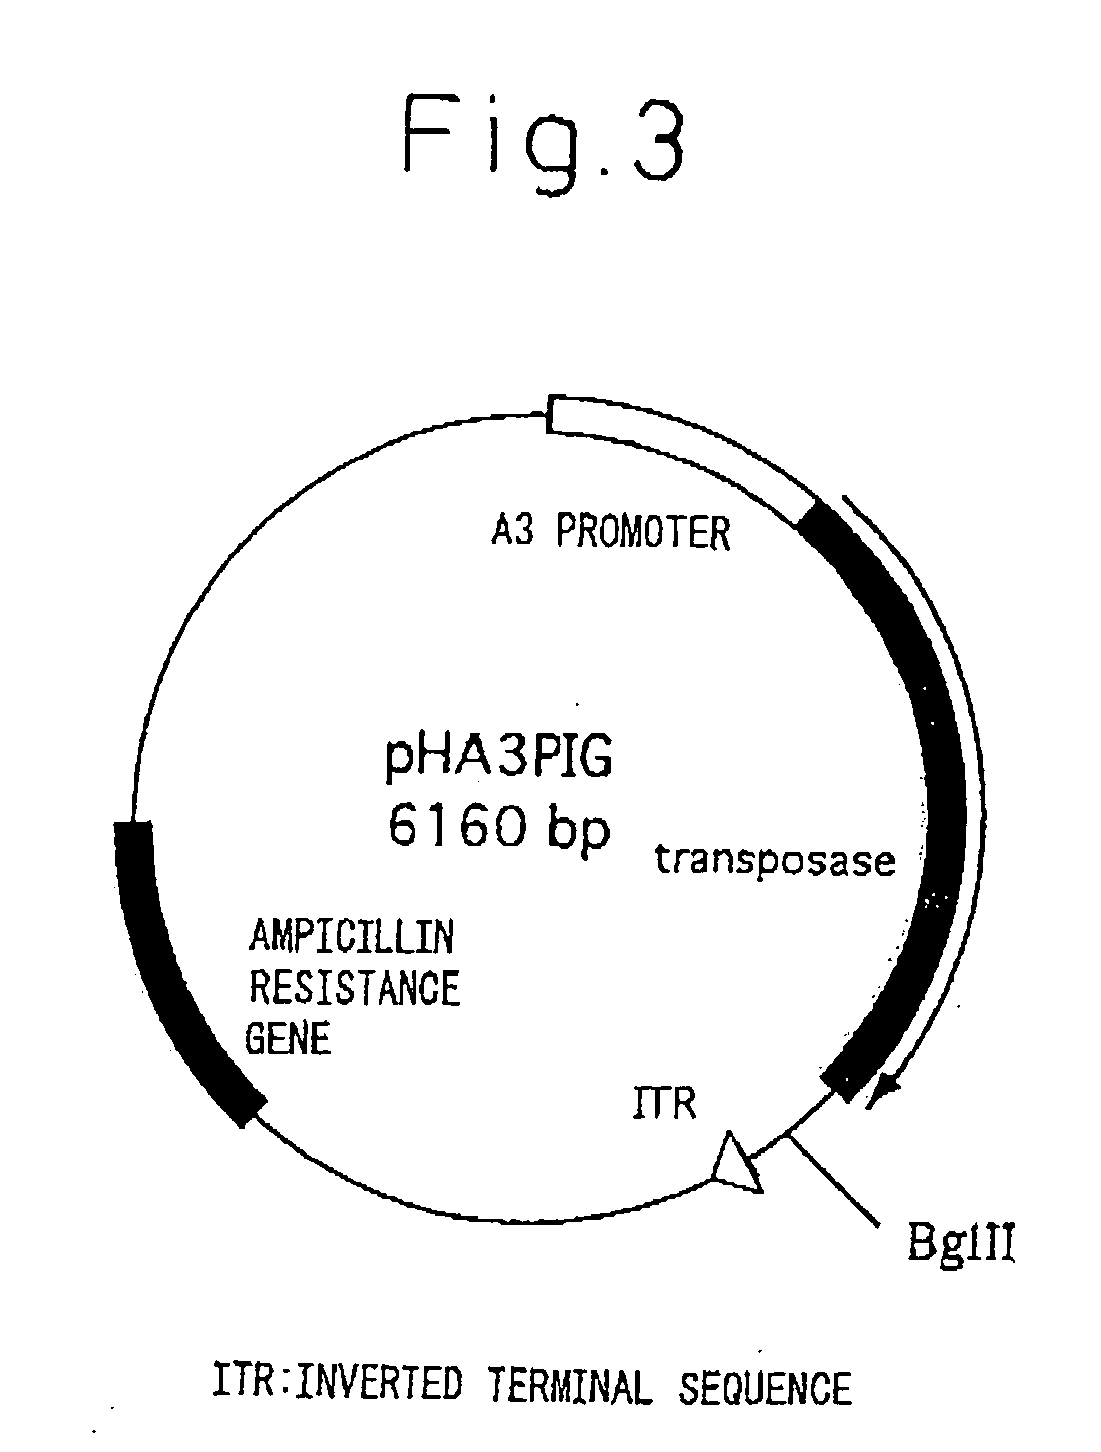 Process for producing physiologically active protein using genetically modified silkworm